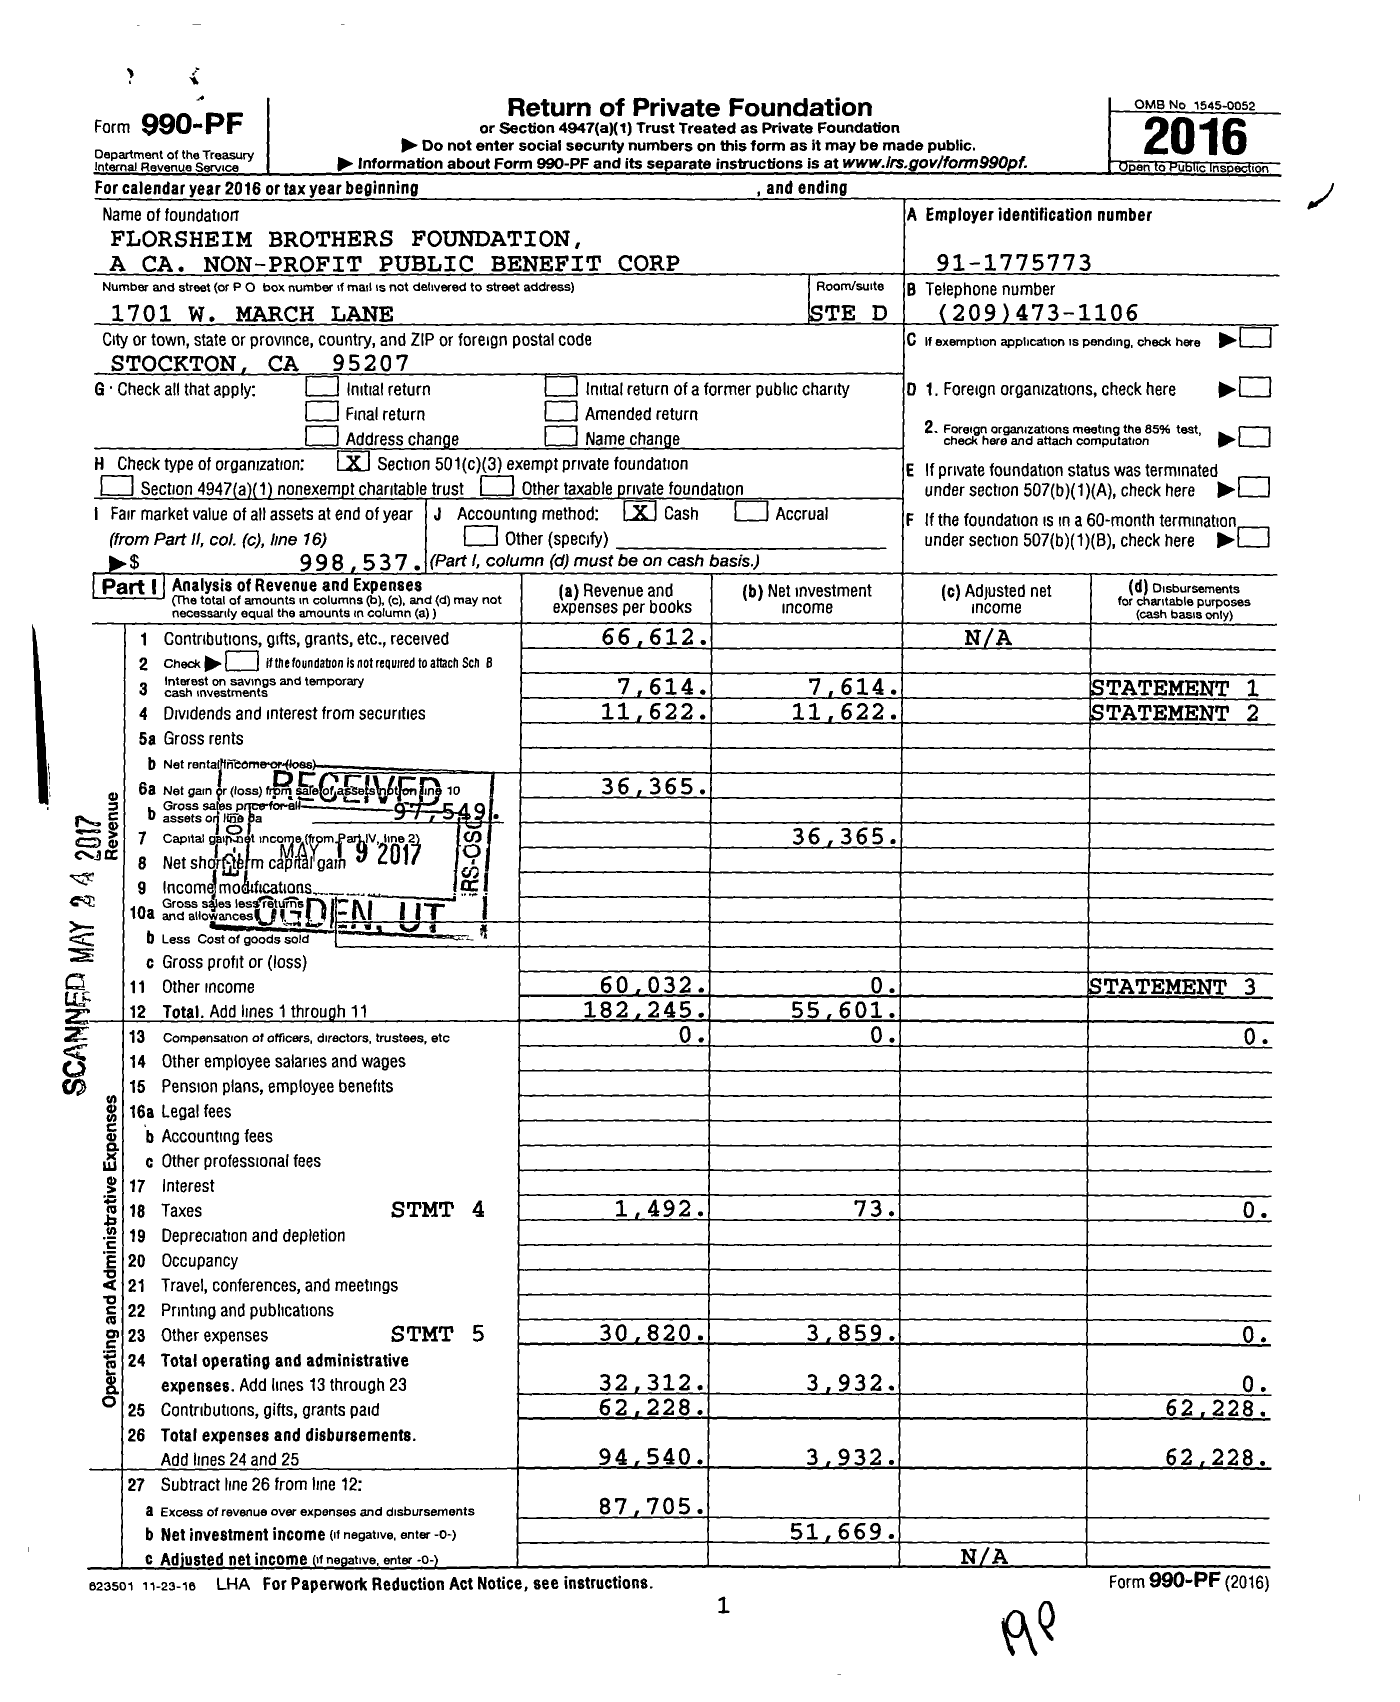 Image of first page of 2016 Form 990PF for Florsheim Brothers Foundation A Ca Non-Profit Public Benefit Corporation